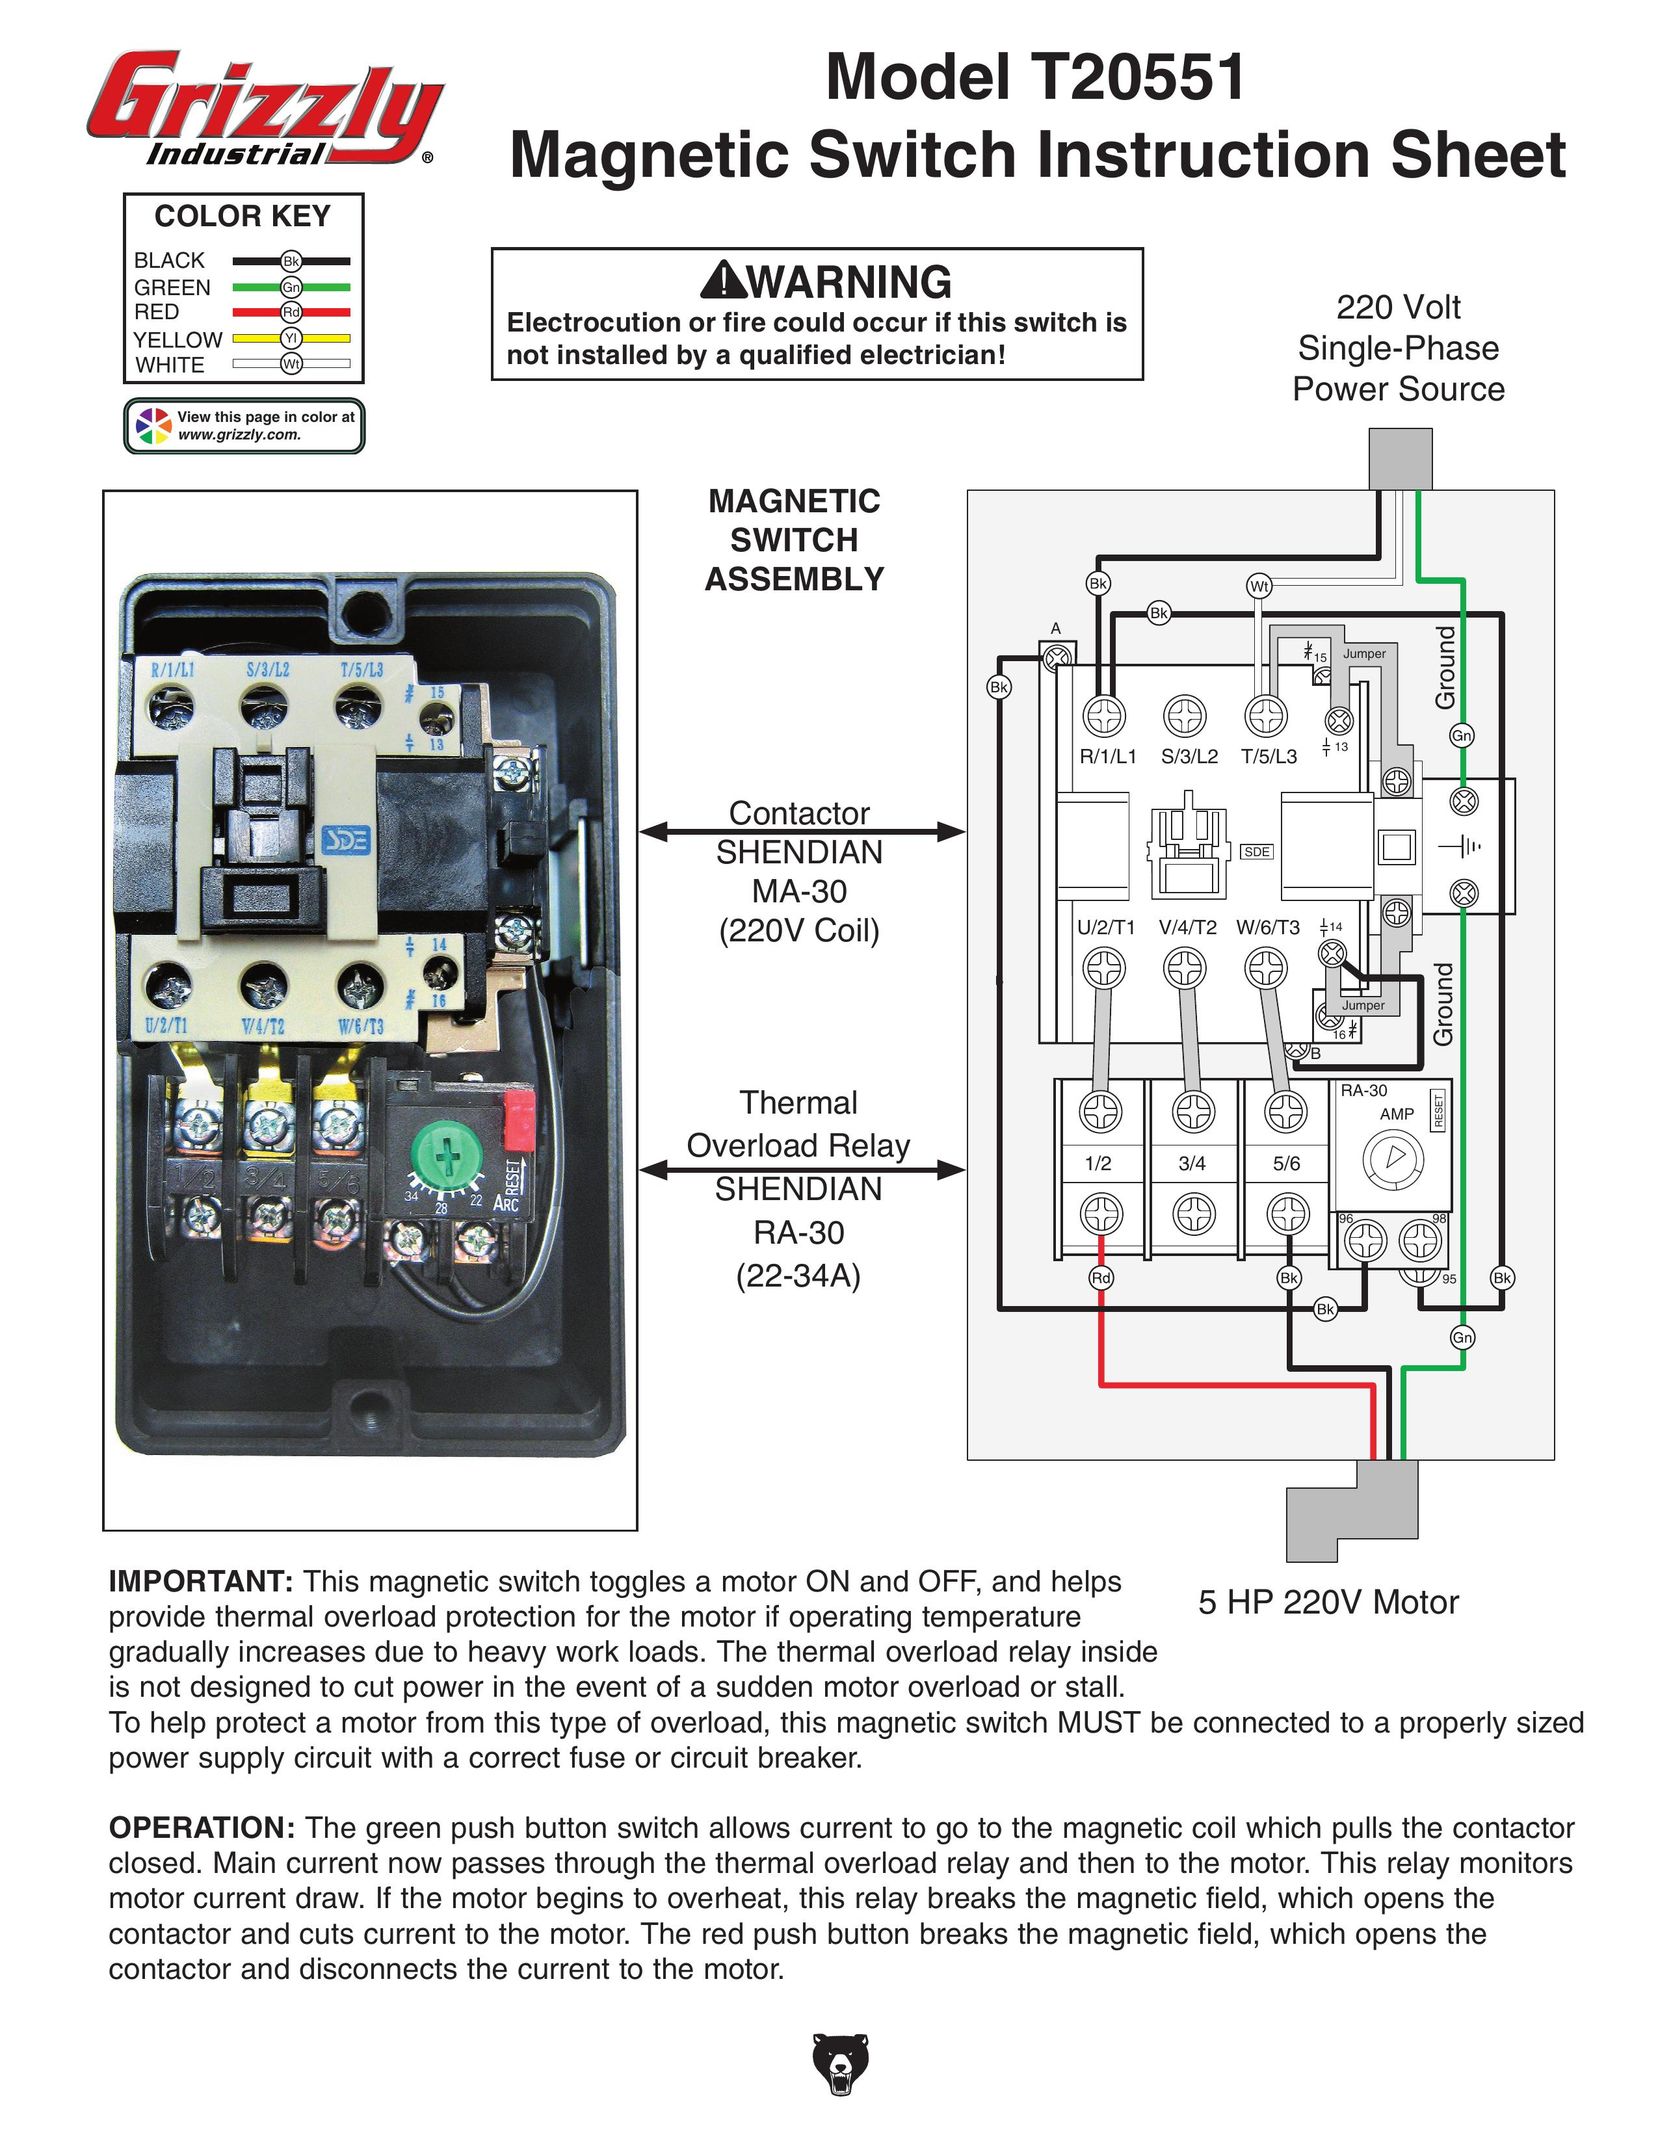 Grizzly T20551 Switch User Manual